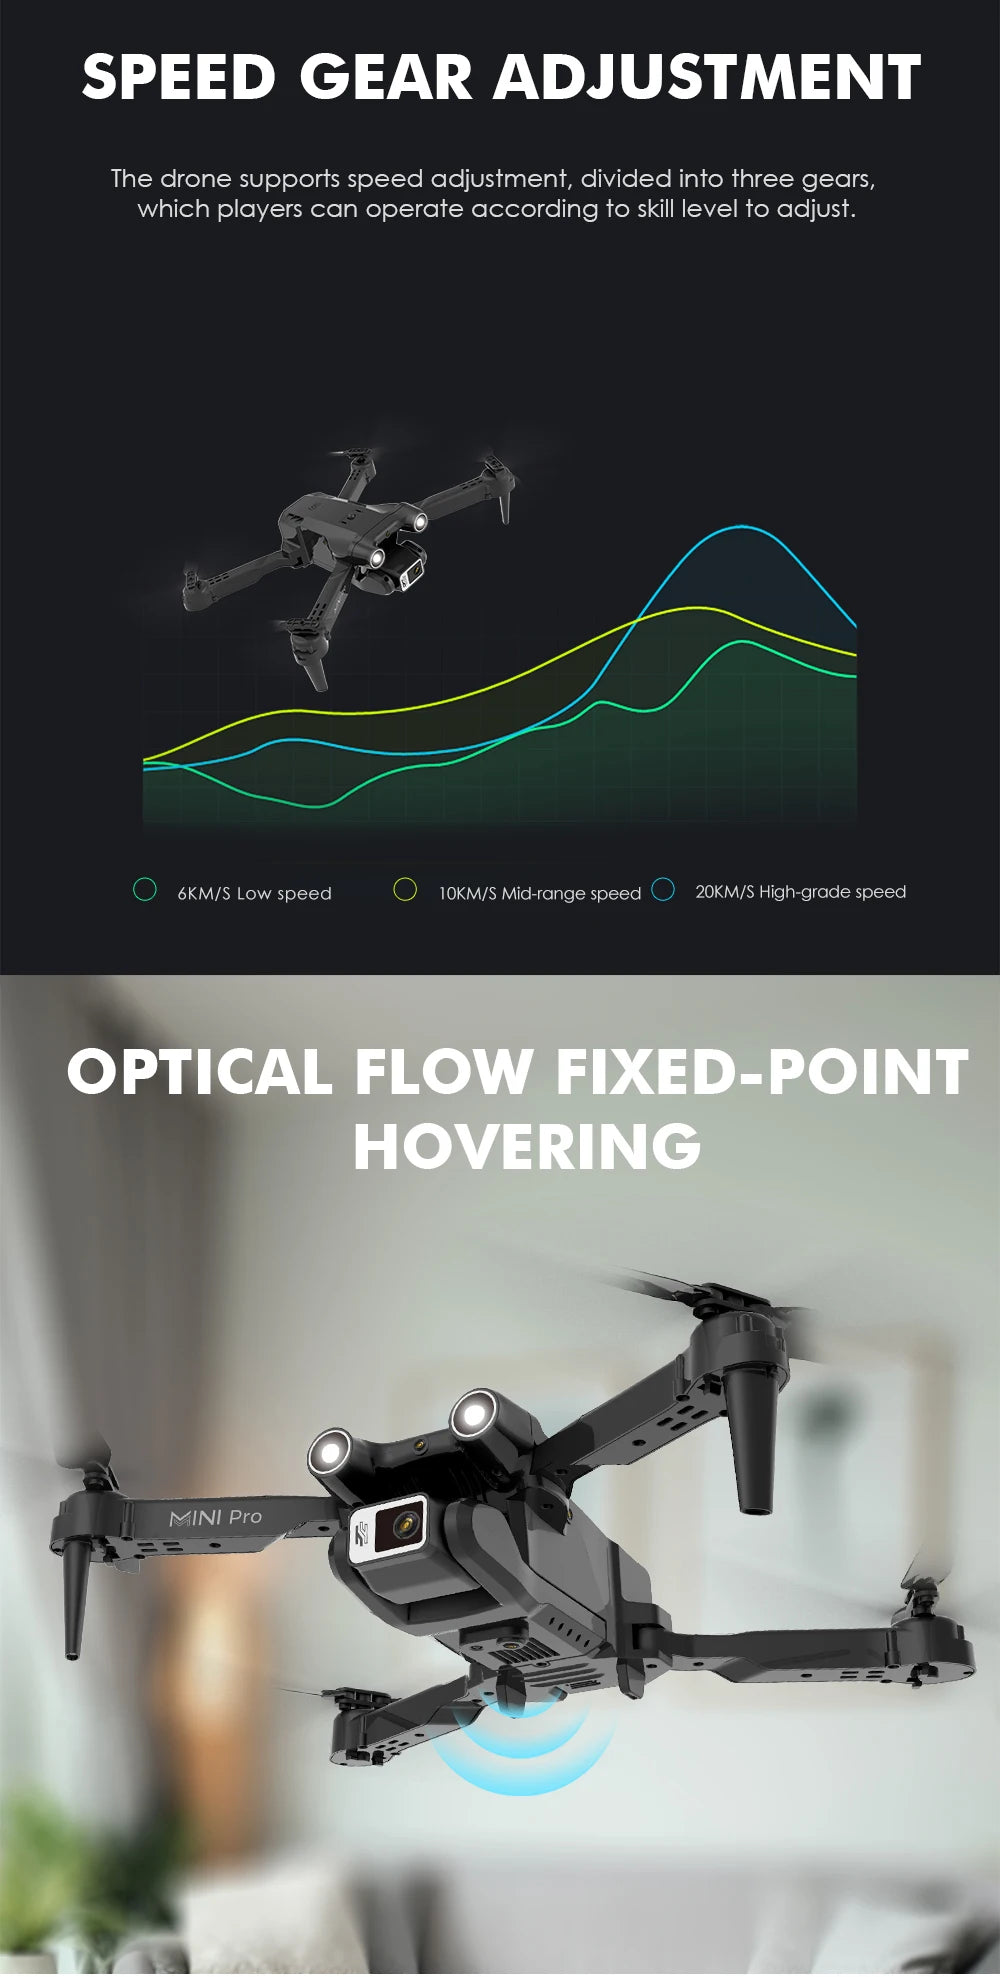 E63 Drone, speed gear adjustment the drone supports speed adjustment, divided into three gears